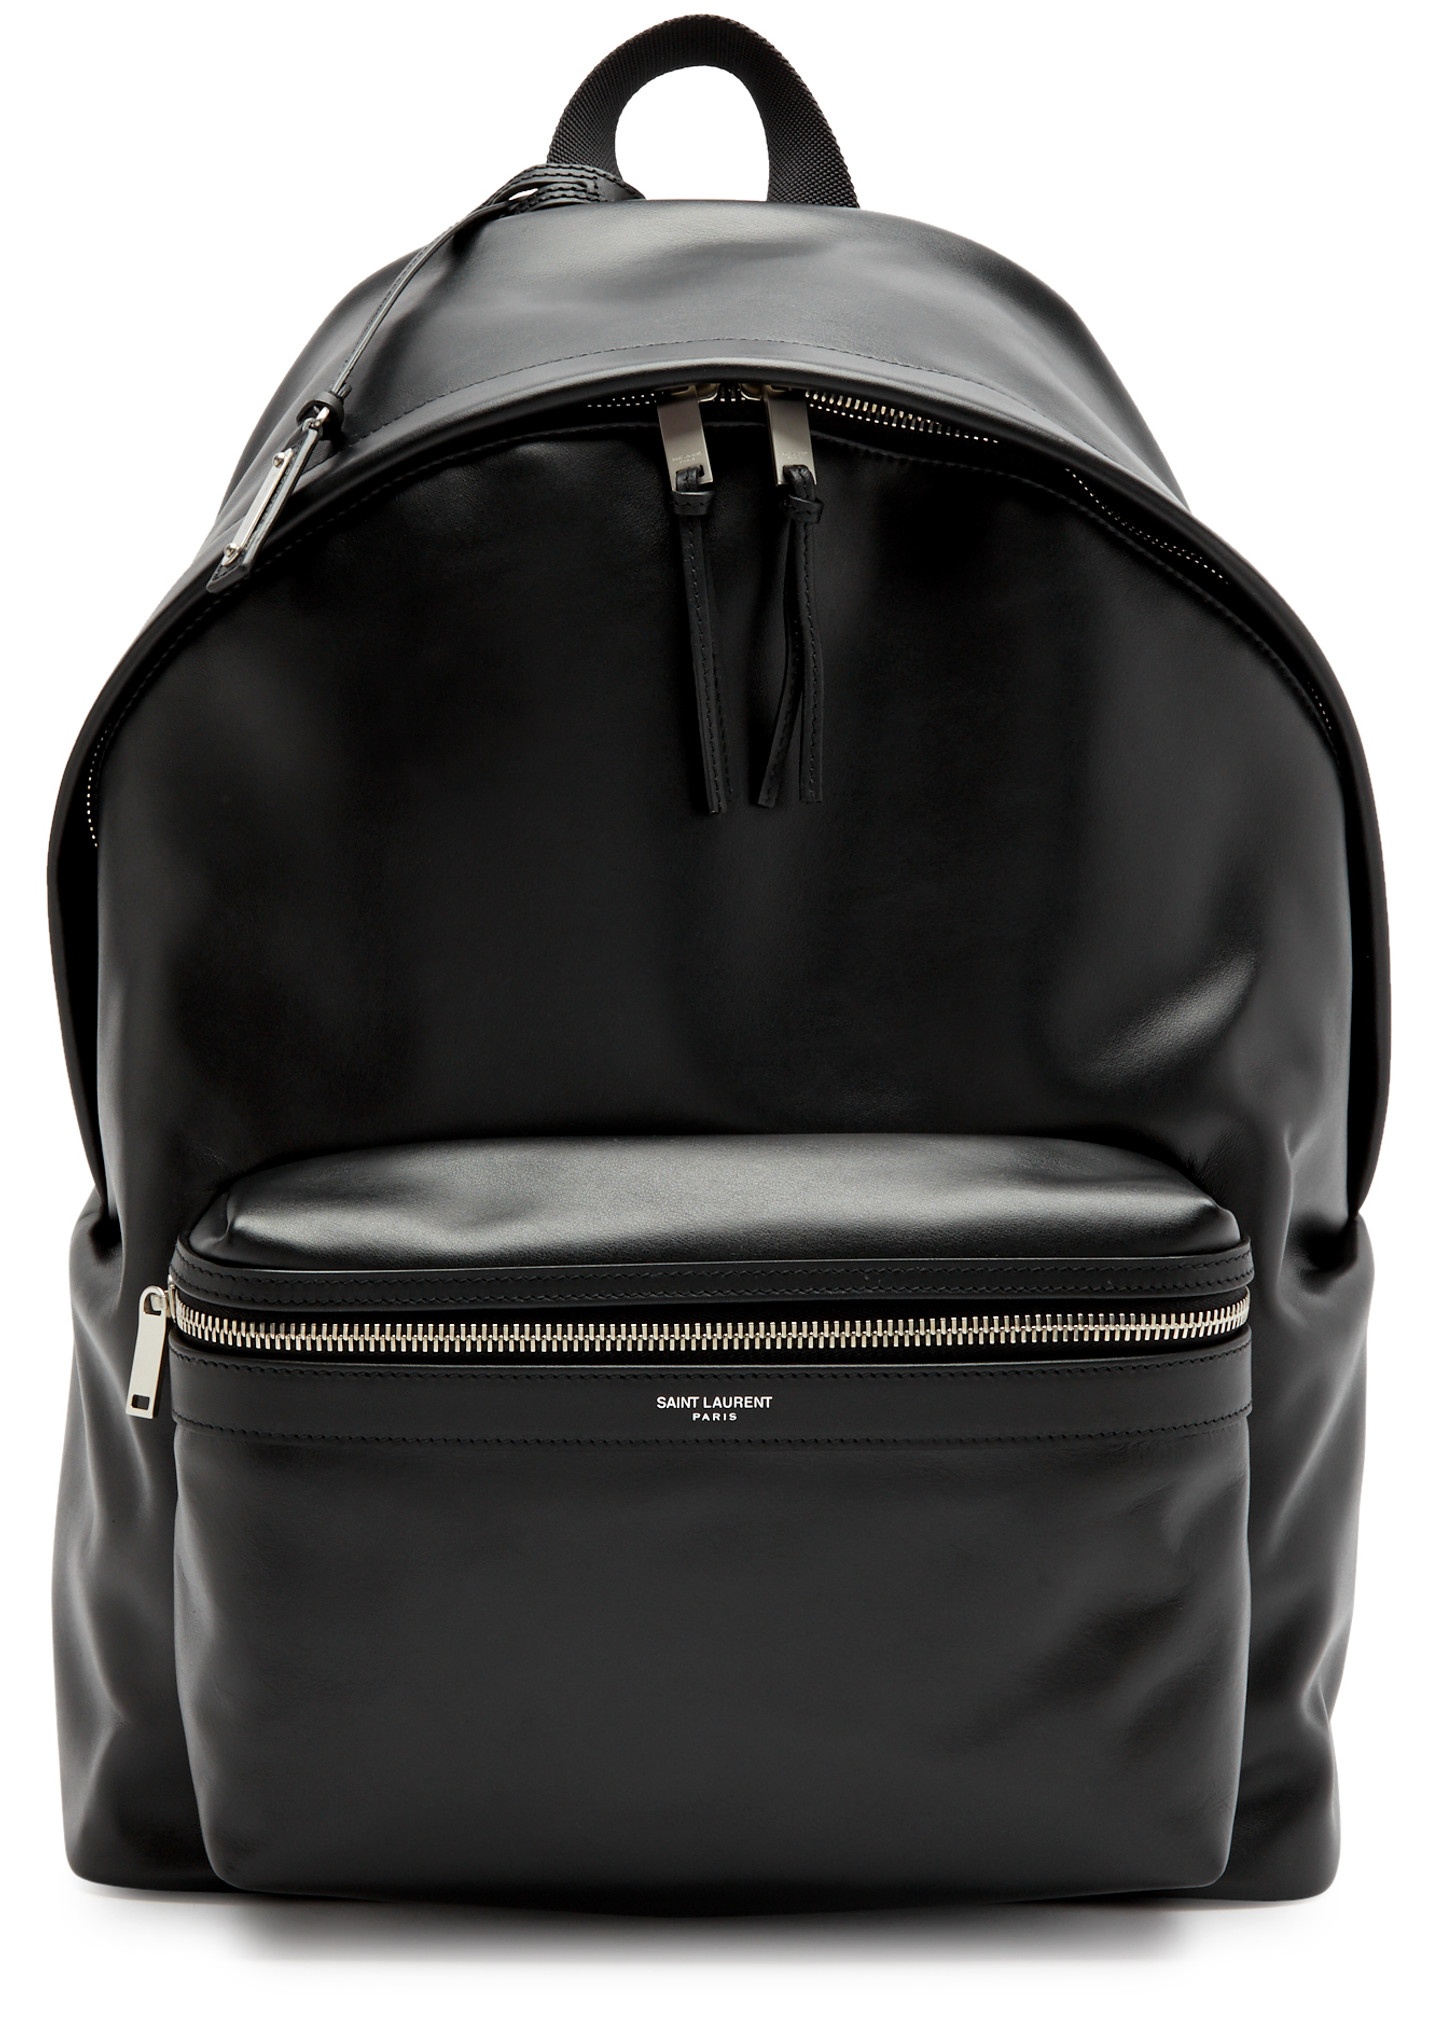 City leather backpack - 1